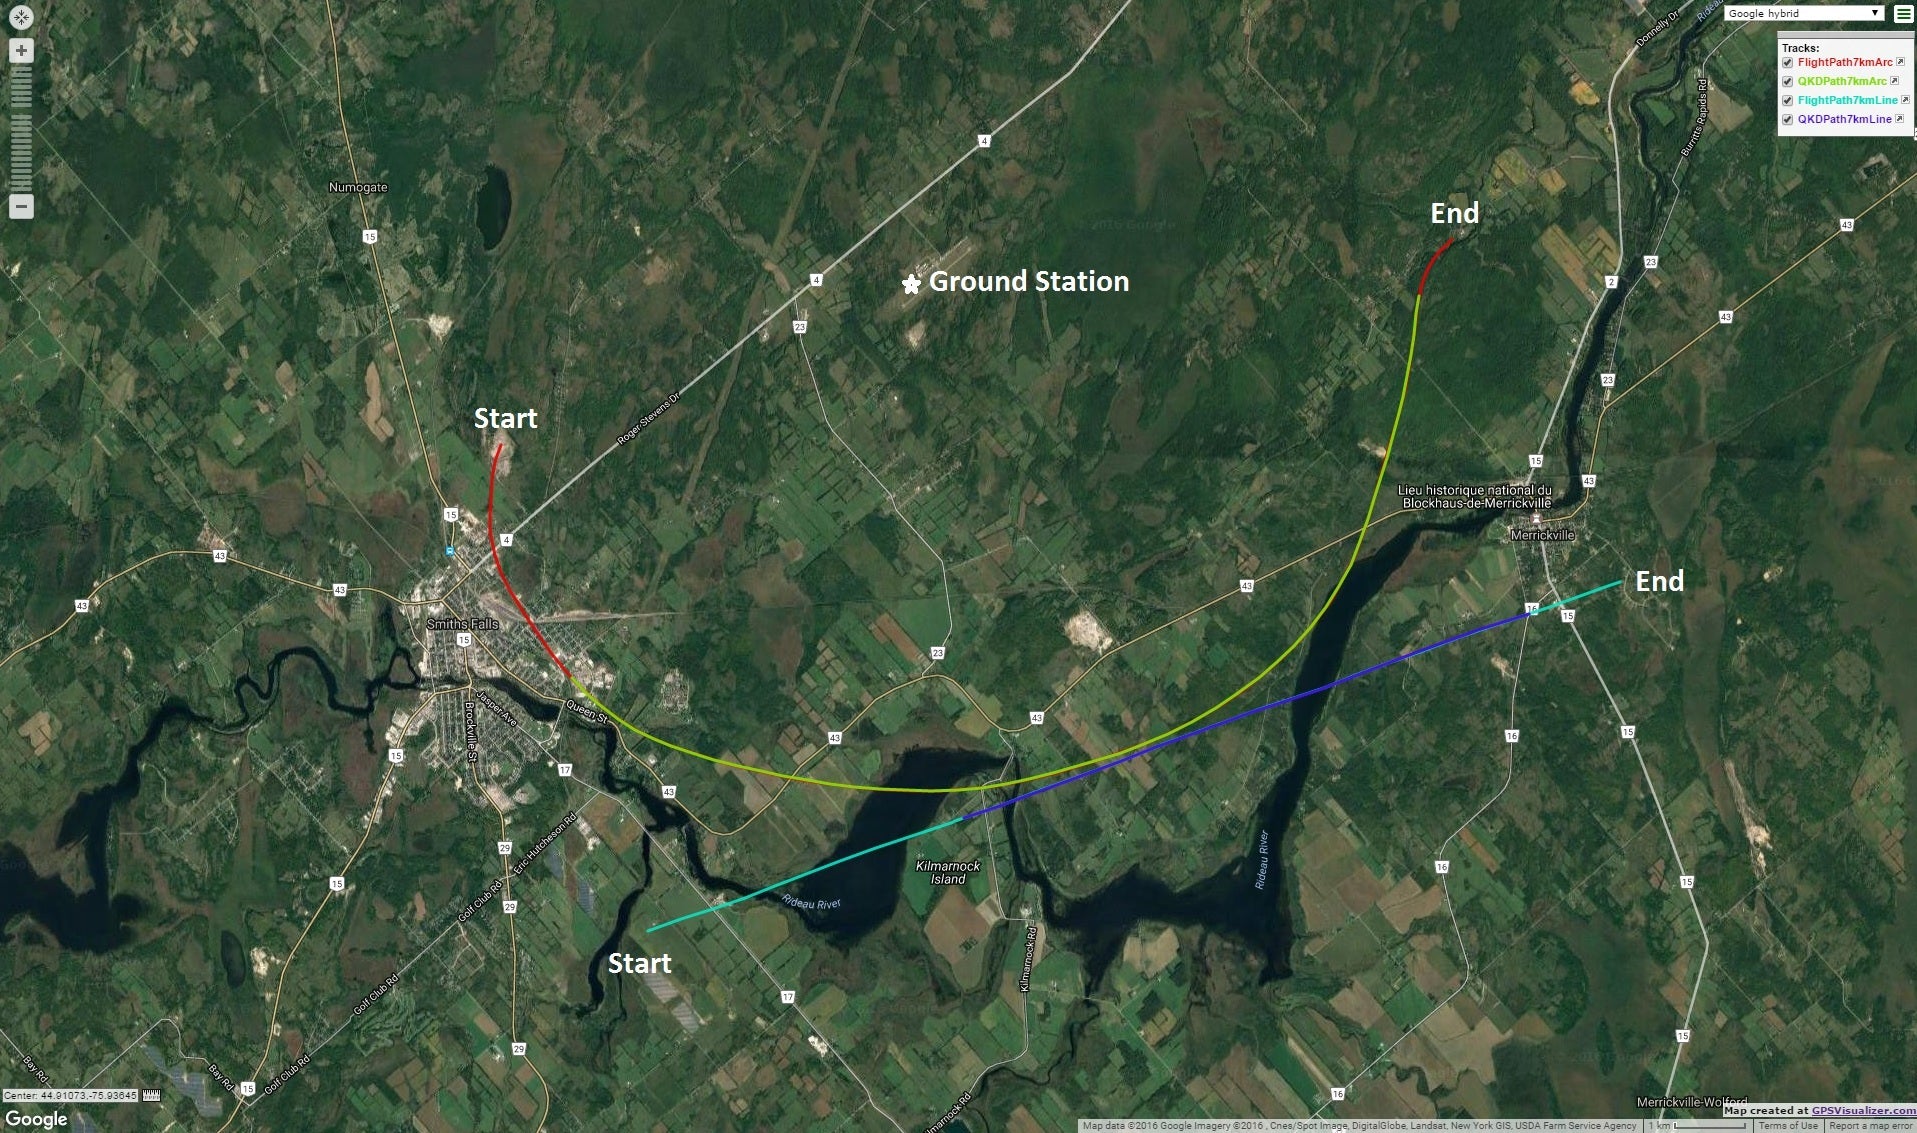 Flight paths for the 7km arc and line, followed from left to right. The star indicates the location of the ground station at Smith Falls{Montague Airport. The inner portions represent where the quantum link was active. Photo produced using GPSVisualizer.com, map data c 2016 Google, imagery c 2016 Cnes/Spot Image, DigitalGlobe, Landsat, New York GIS, USDA Farm Service Agency. 